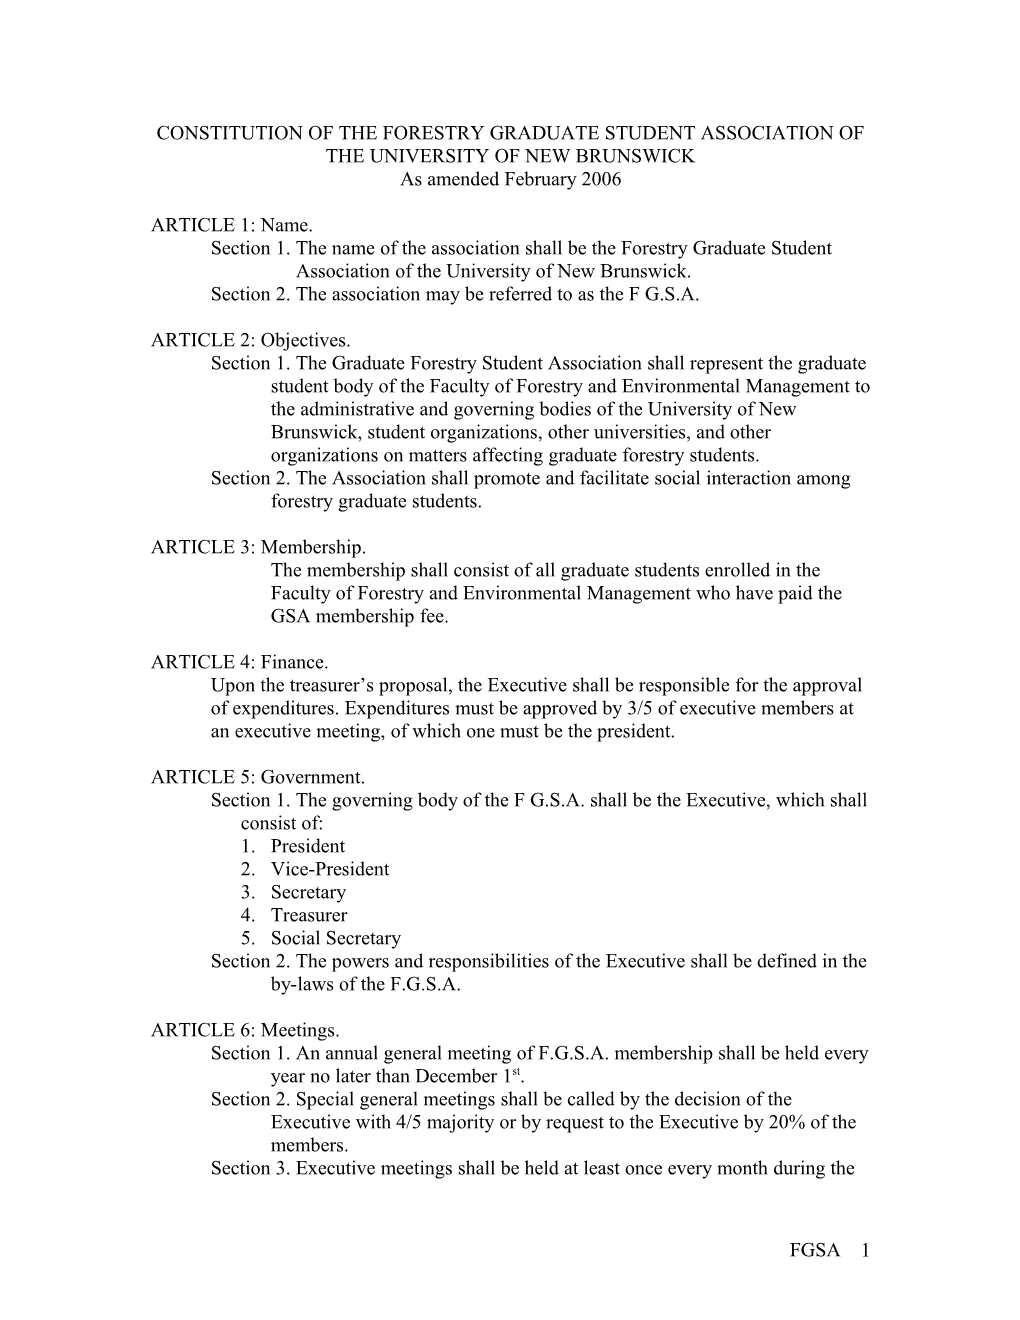 Constitution of the Forestry Graduate Student Association of the University of New Brunswick